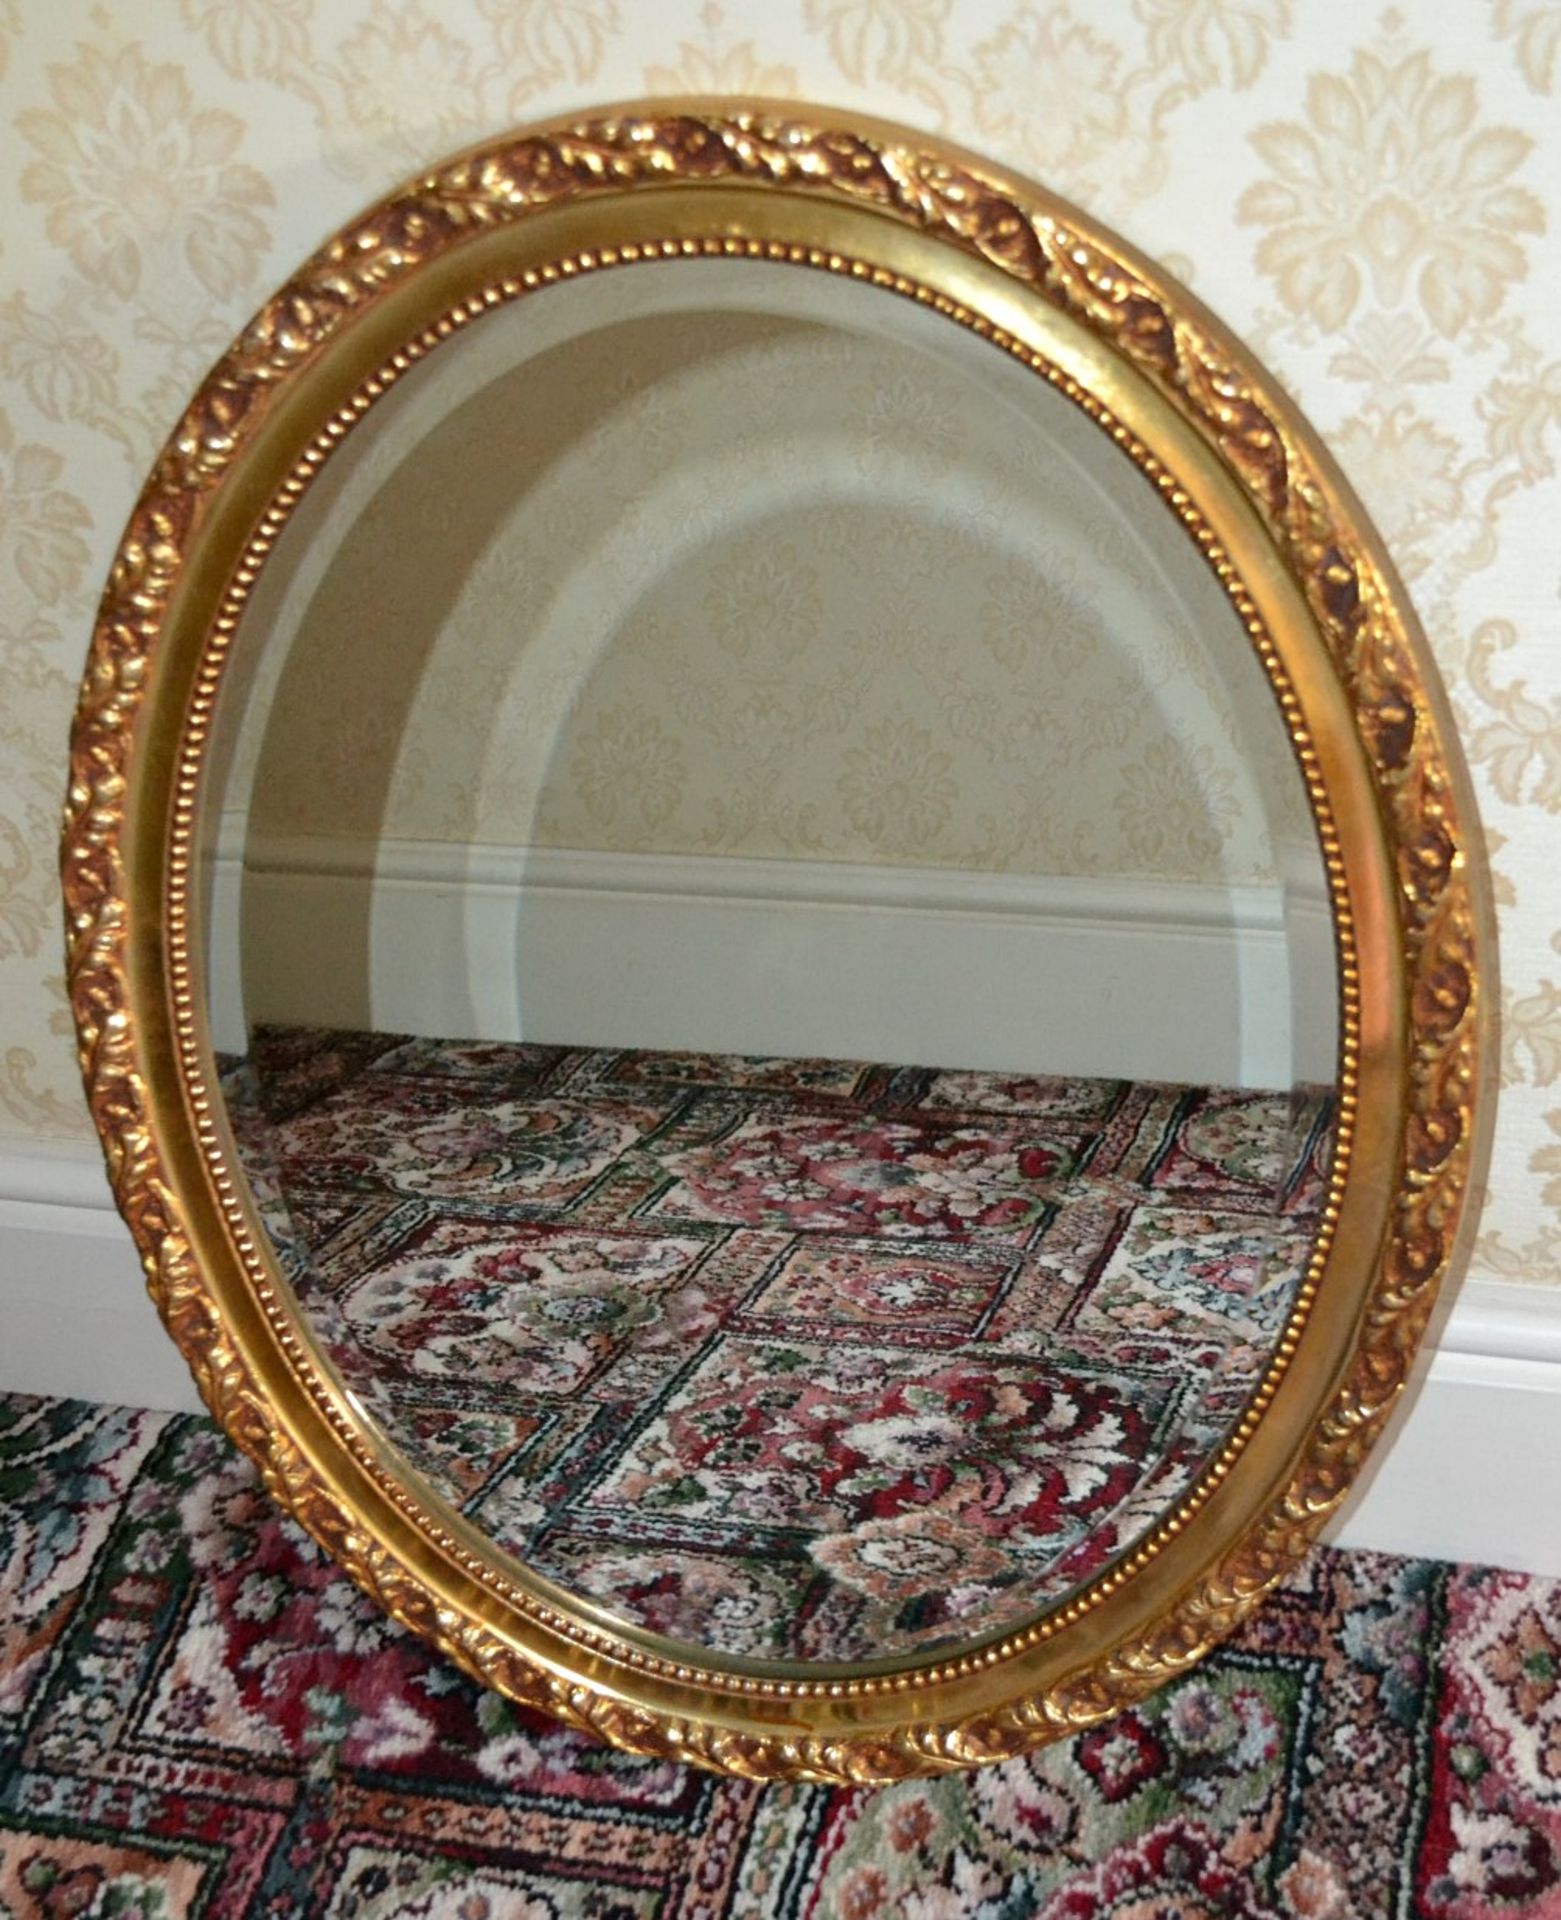 1 x Vintage Oval Ornate Gilt Frame Mirror - From A Grade II Listed Hall In Very Good Condition *More